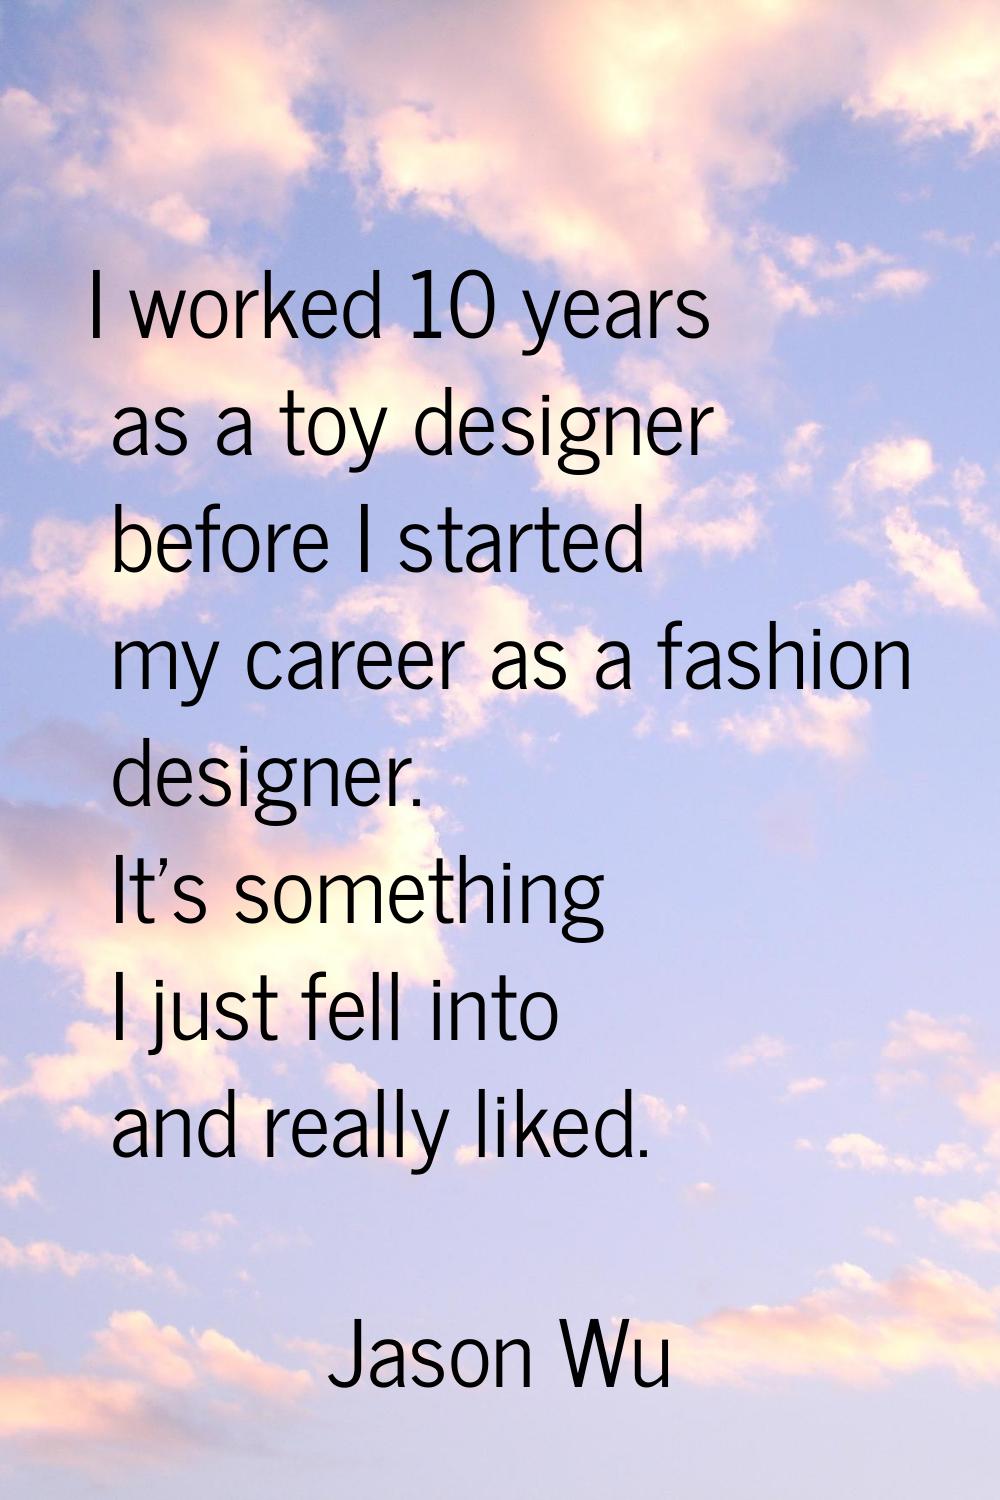 I worked 10 years as a toy designer before I started my career as a fashion designer. It's somethin